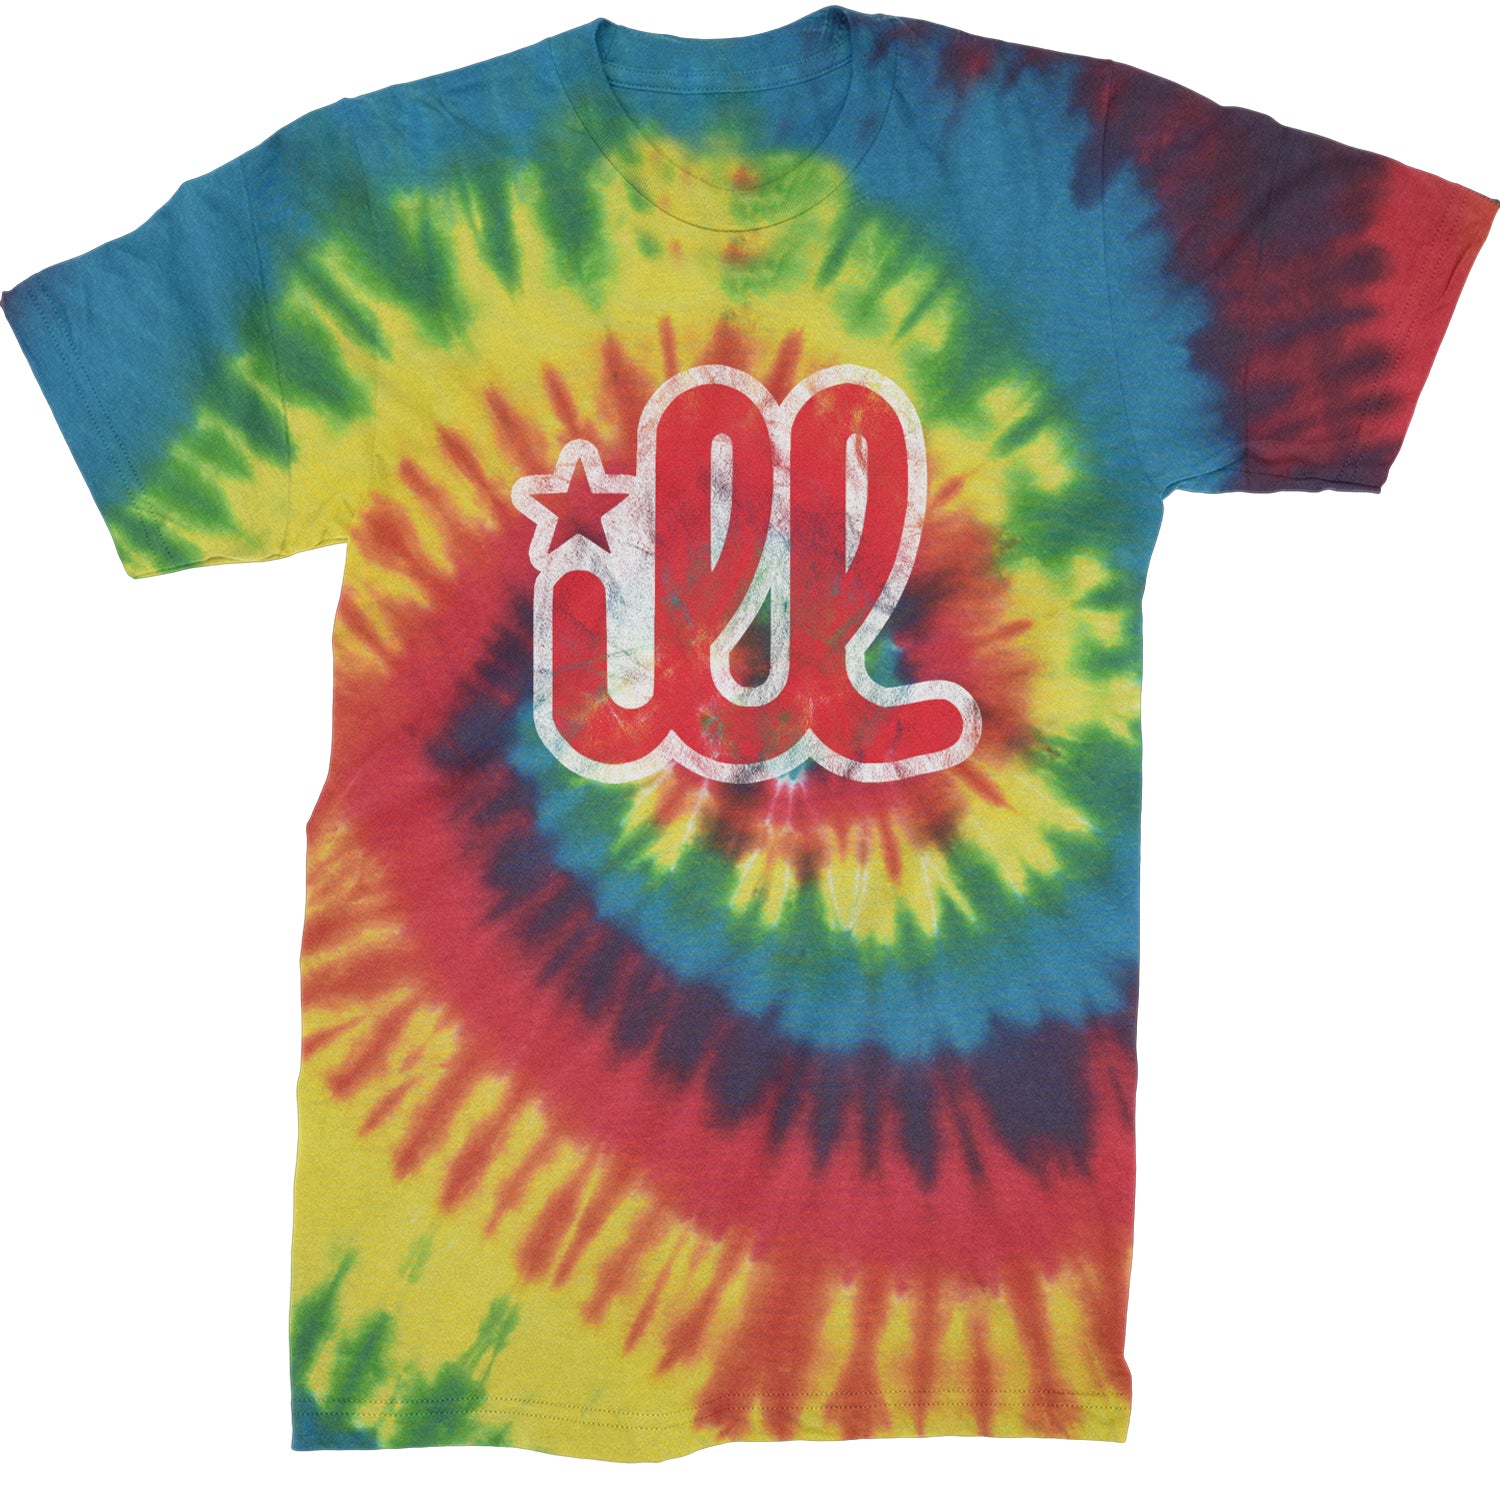 ILL Vintage It's A Philadelphia Philly Thing Mens T-shirt Tie-Dye Rainbow Reactive